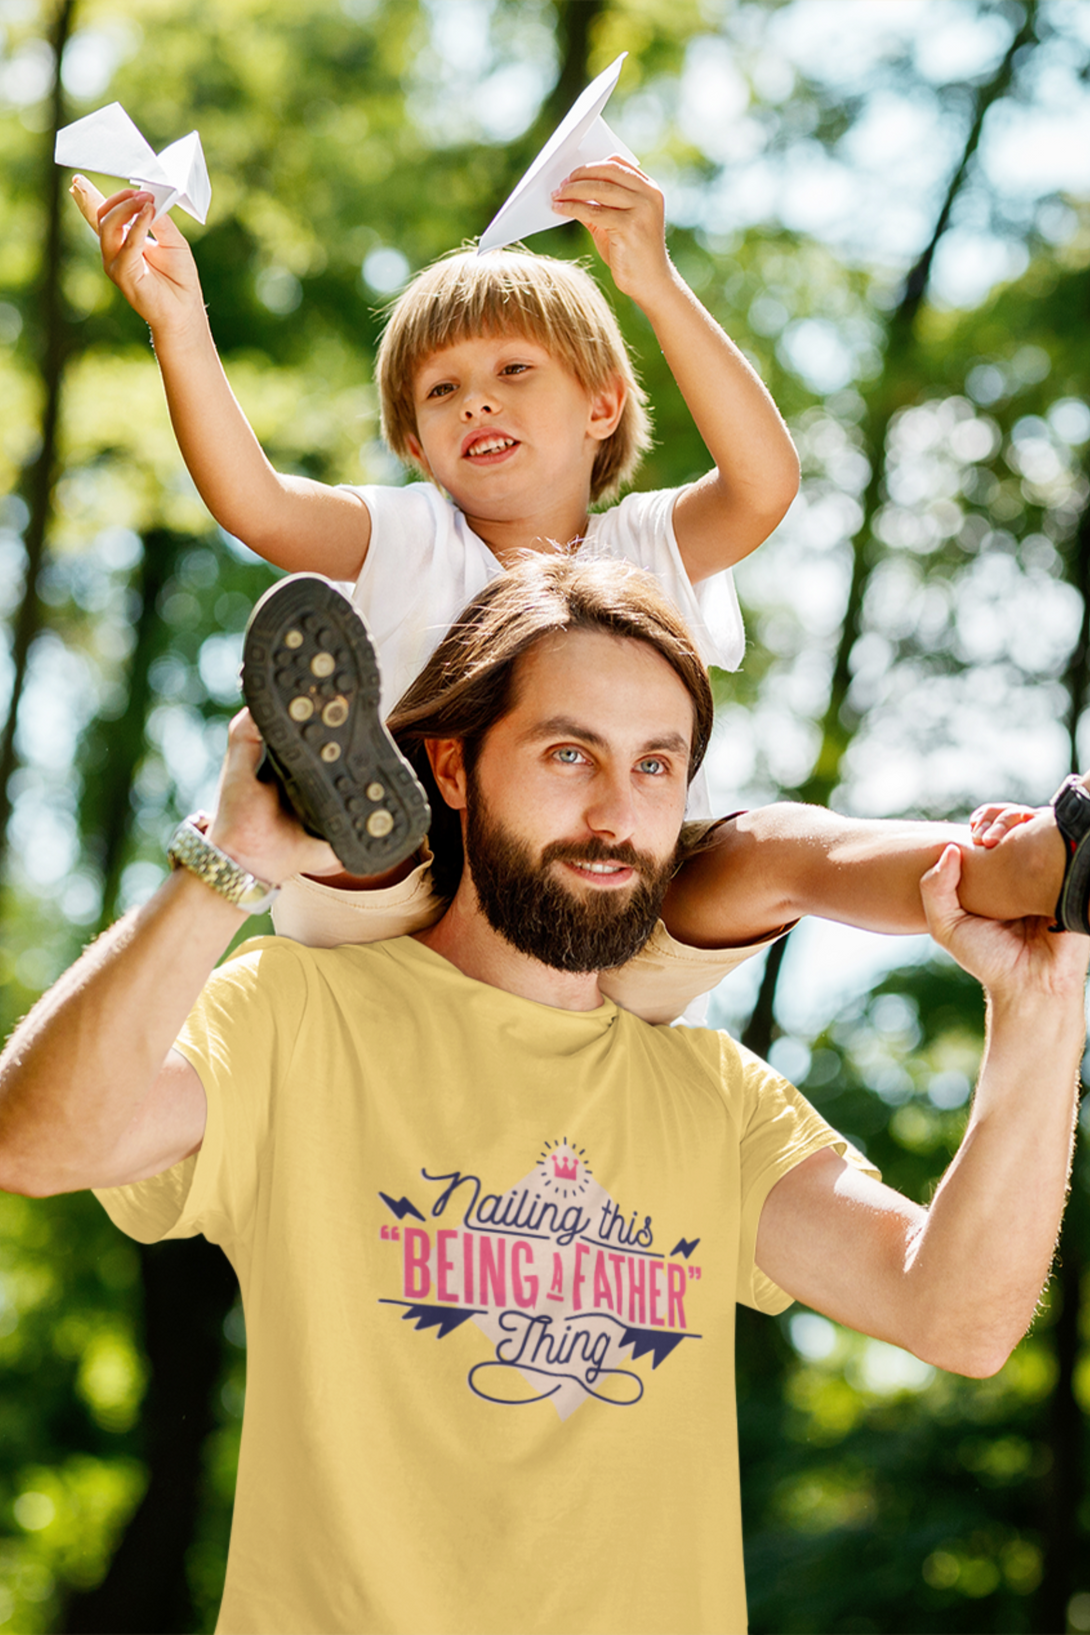 Nailing This Being A Father Thing Printed T-Shirt For Men - WowWaves